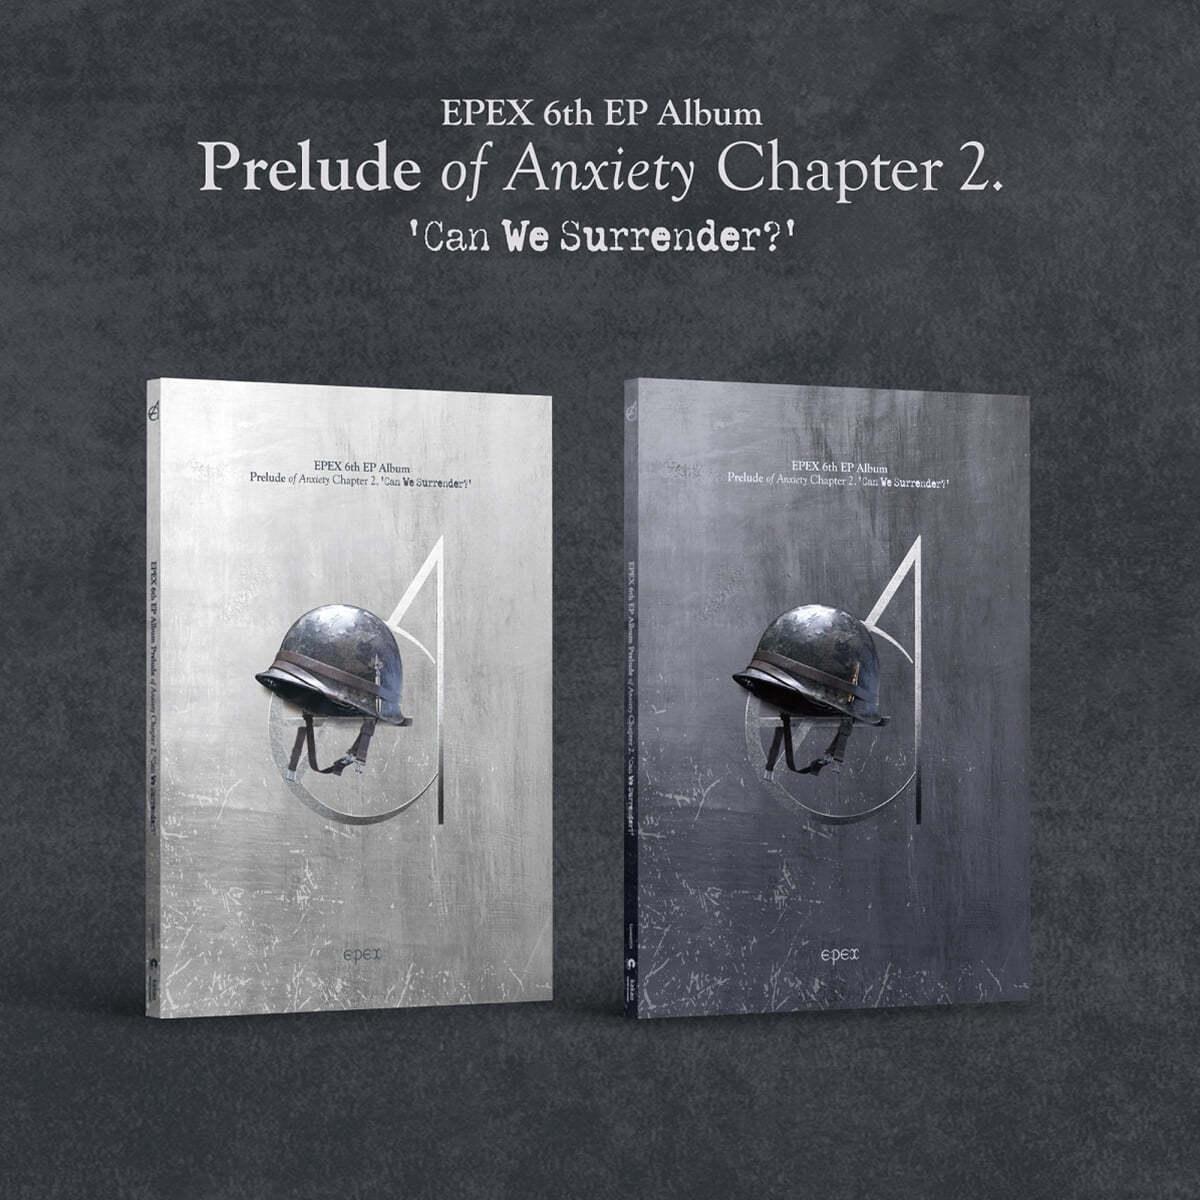 EPEX 6th EP Album – Prelude of Anxiety Chapter 2. ‘Can We Surrender?’ - KKANG